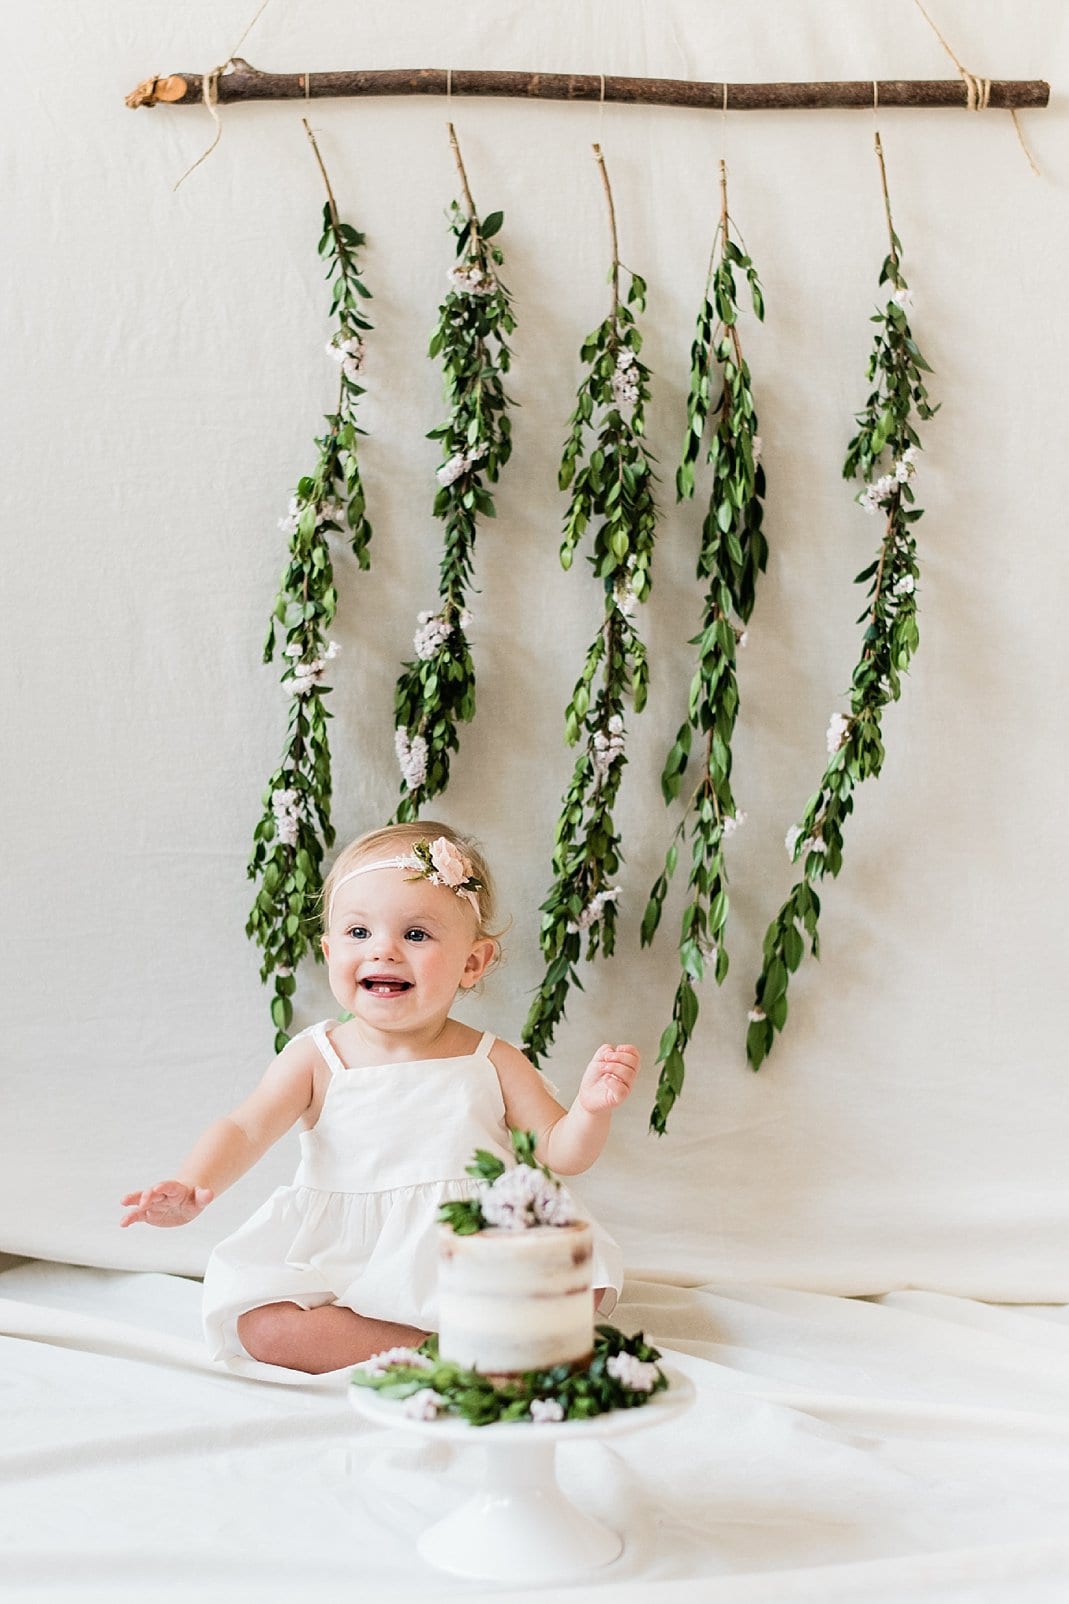 Raleigh cake smash for 1 year old girl in front of backdrop with greenery hanging down photo